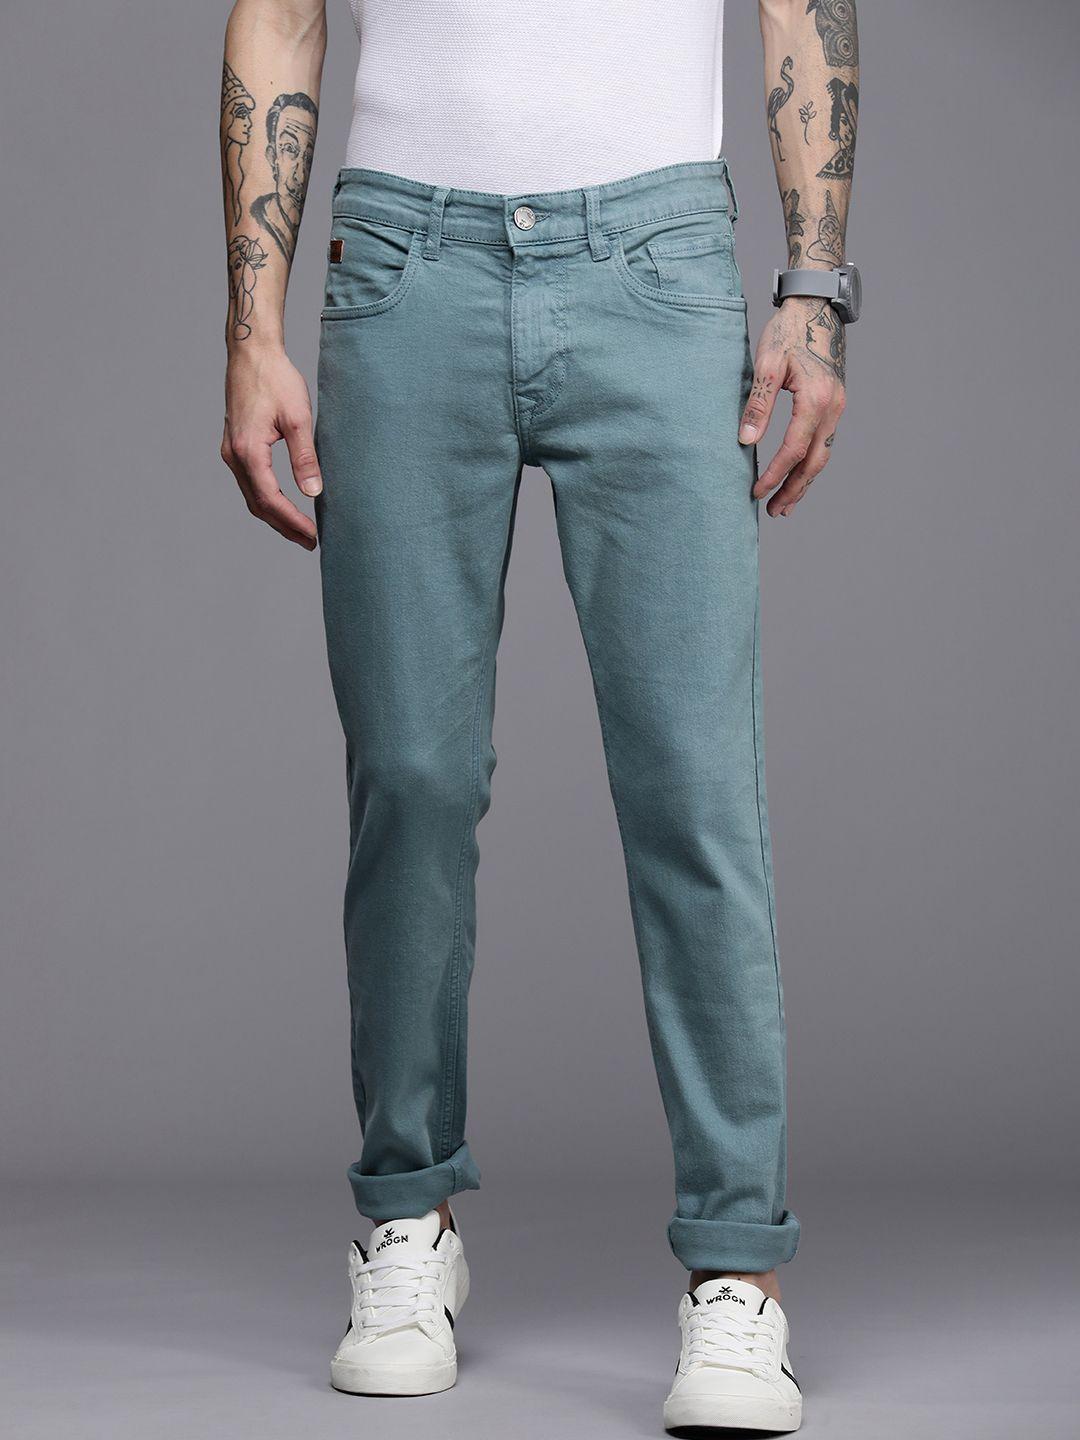 wrogn men teal green slim fit mid rise stretchable jeans